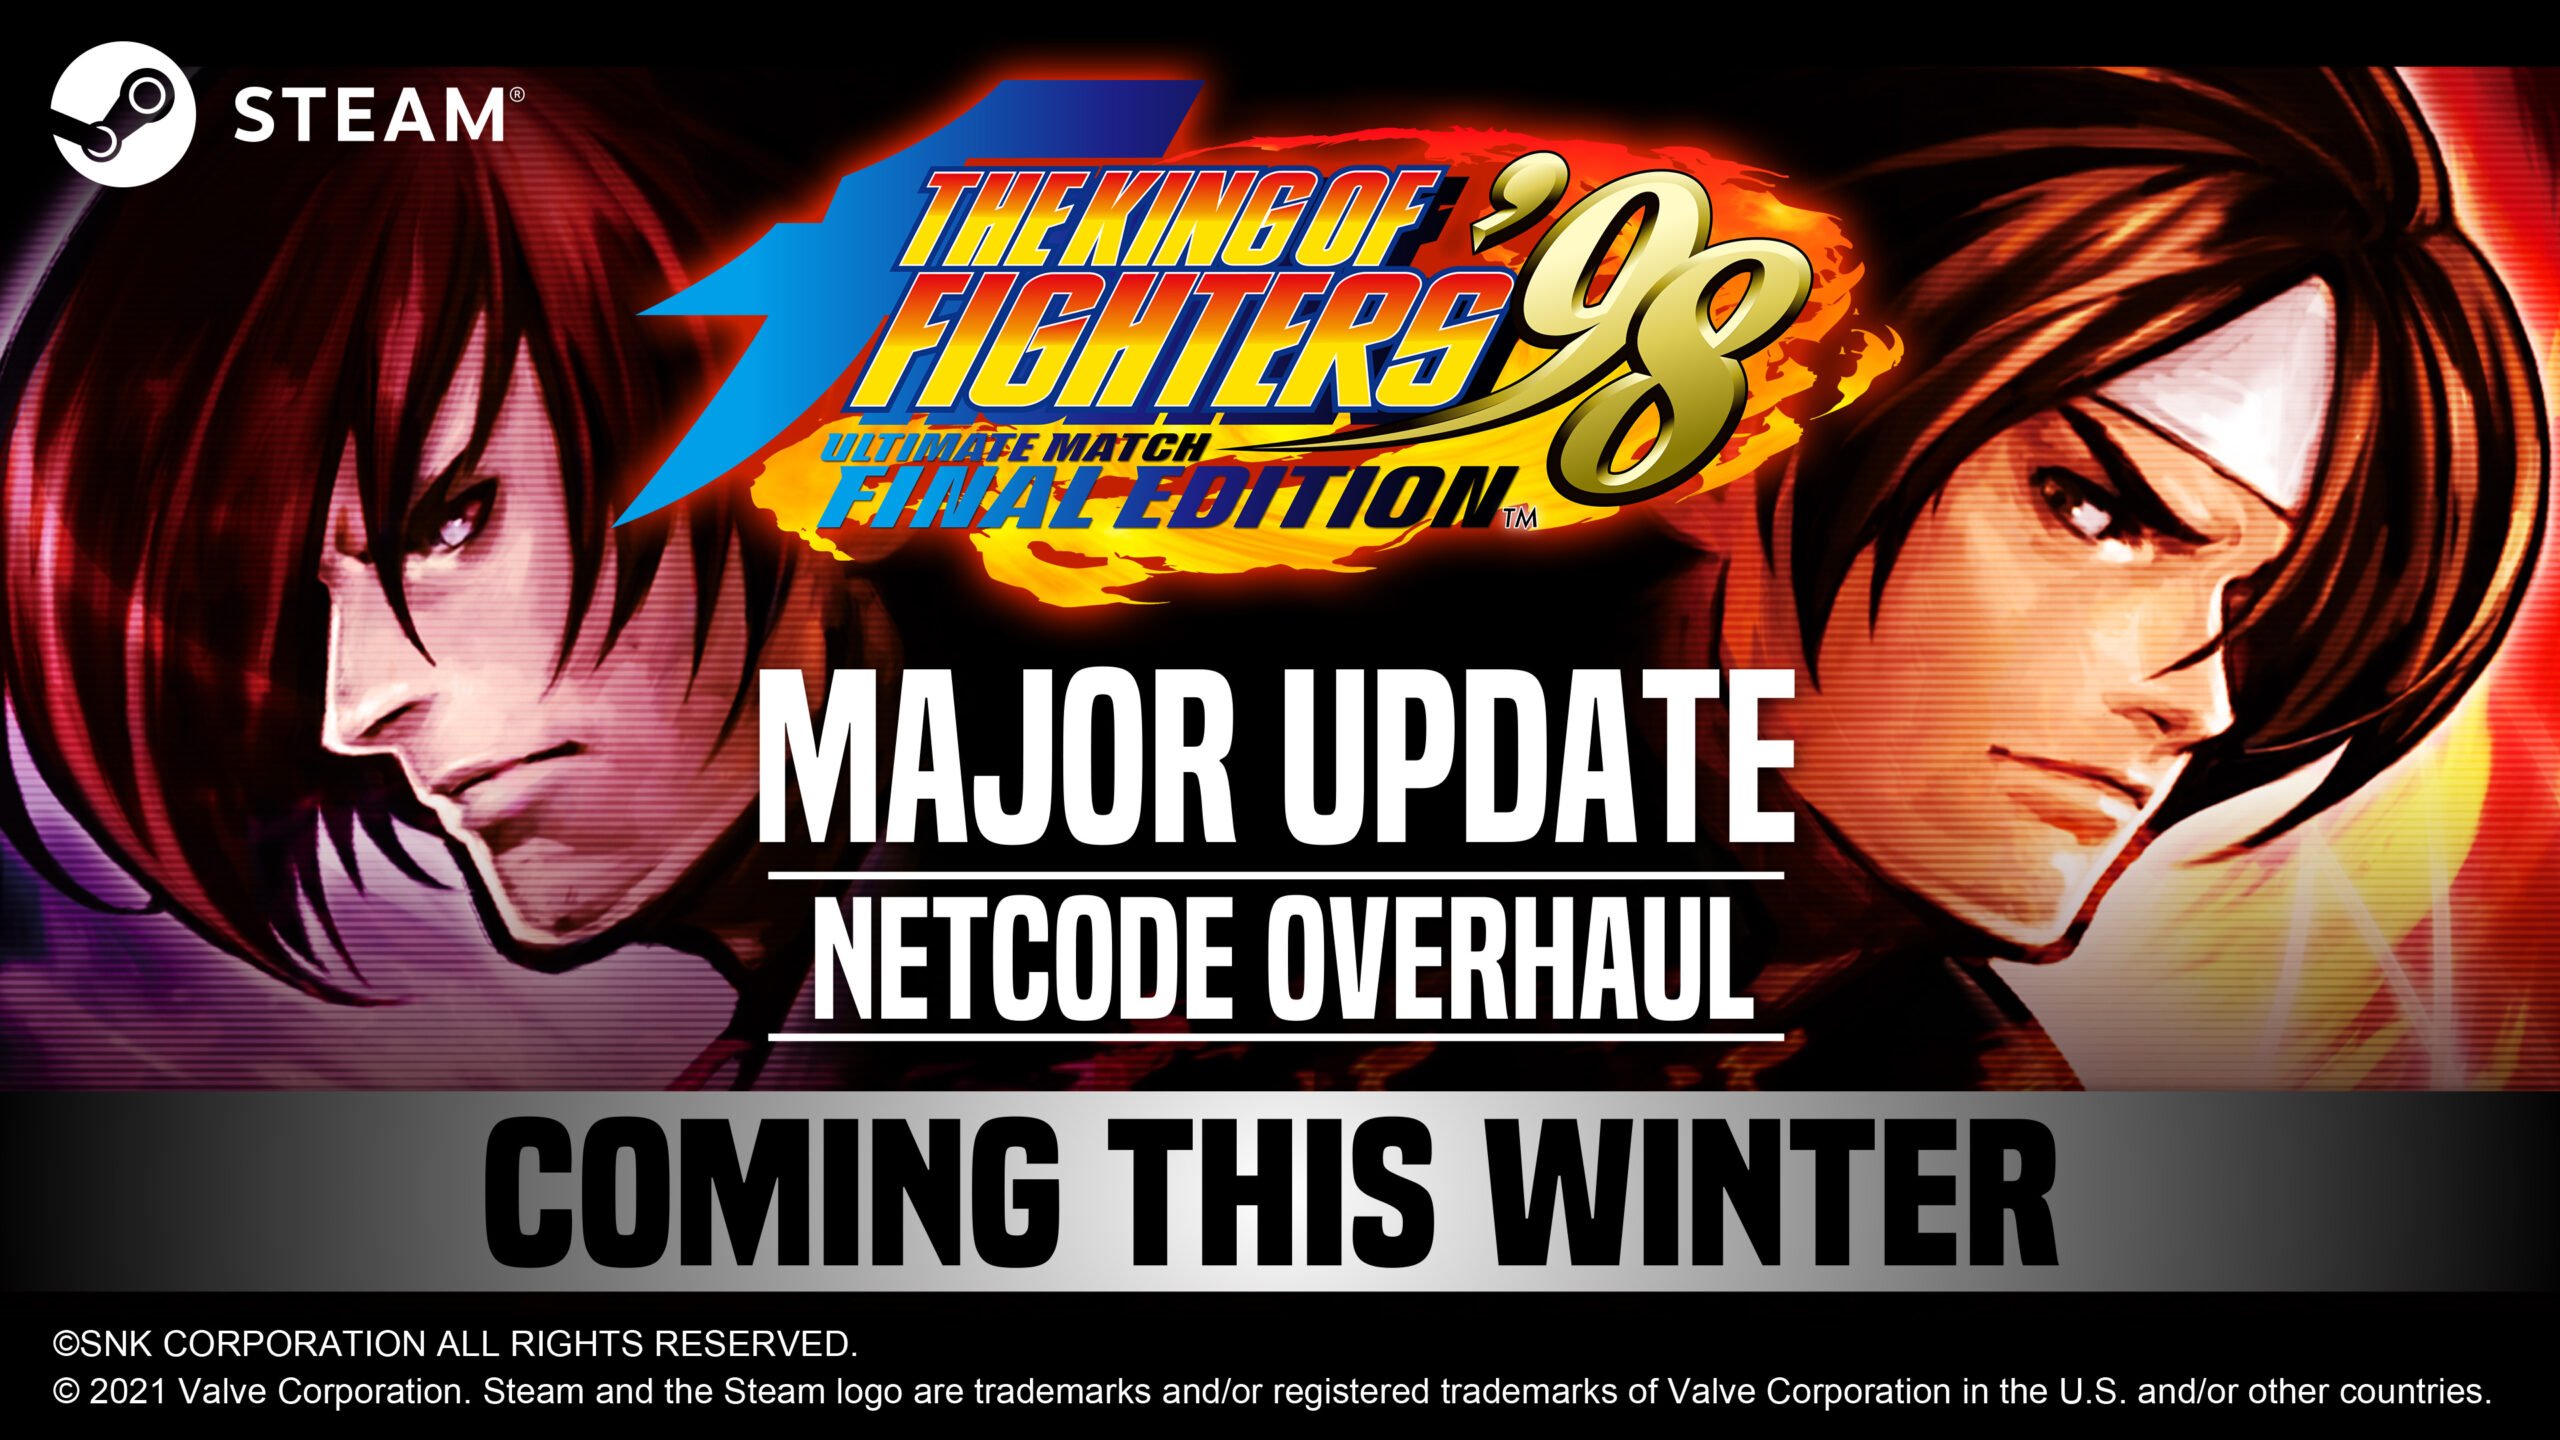 The King of Fighters ’98 Ultimate Match Final Edition for PC to add rollback netcode this winter – Gematsu